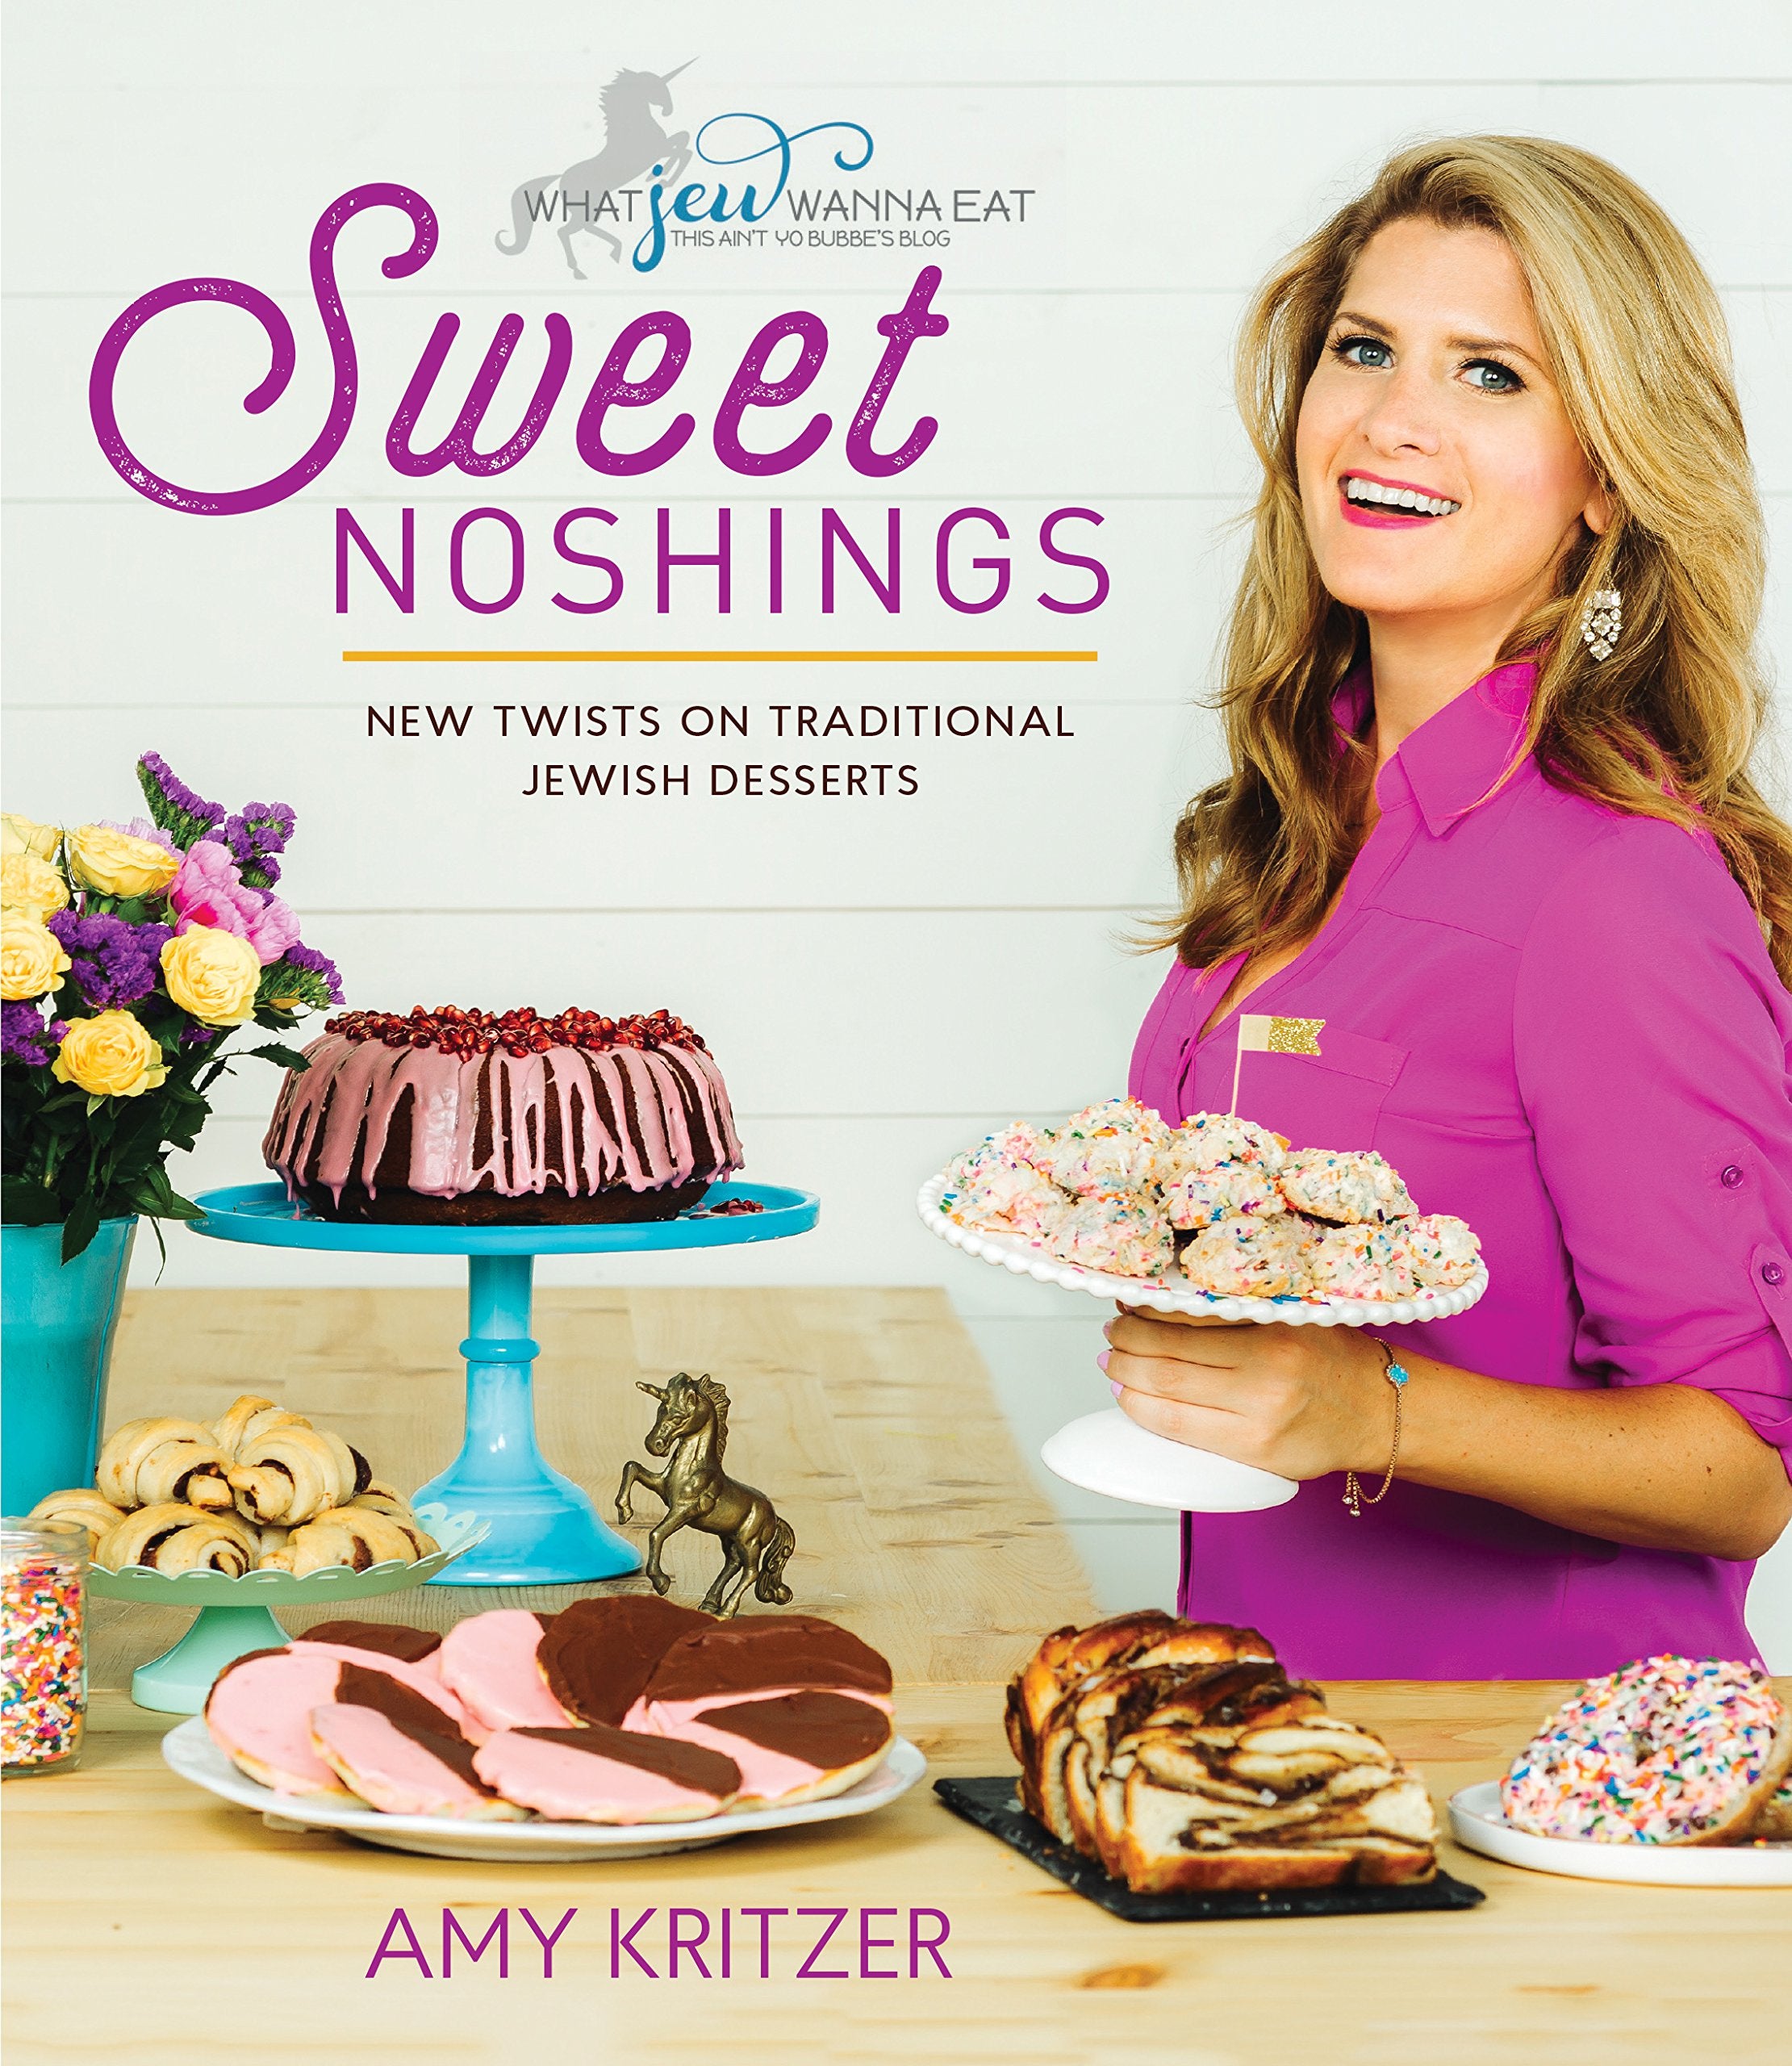 Sweet Noshings: New Twists on Traditional Jewish Desserts (Amy Kritzer) *Signed*